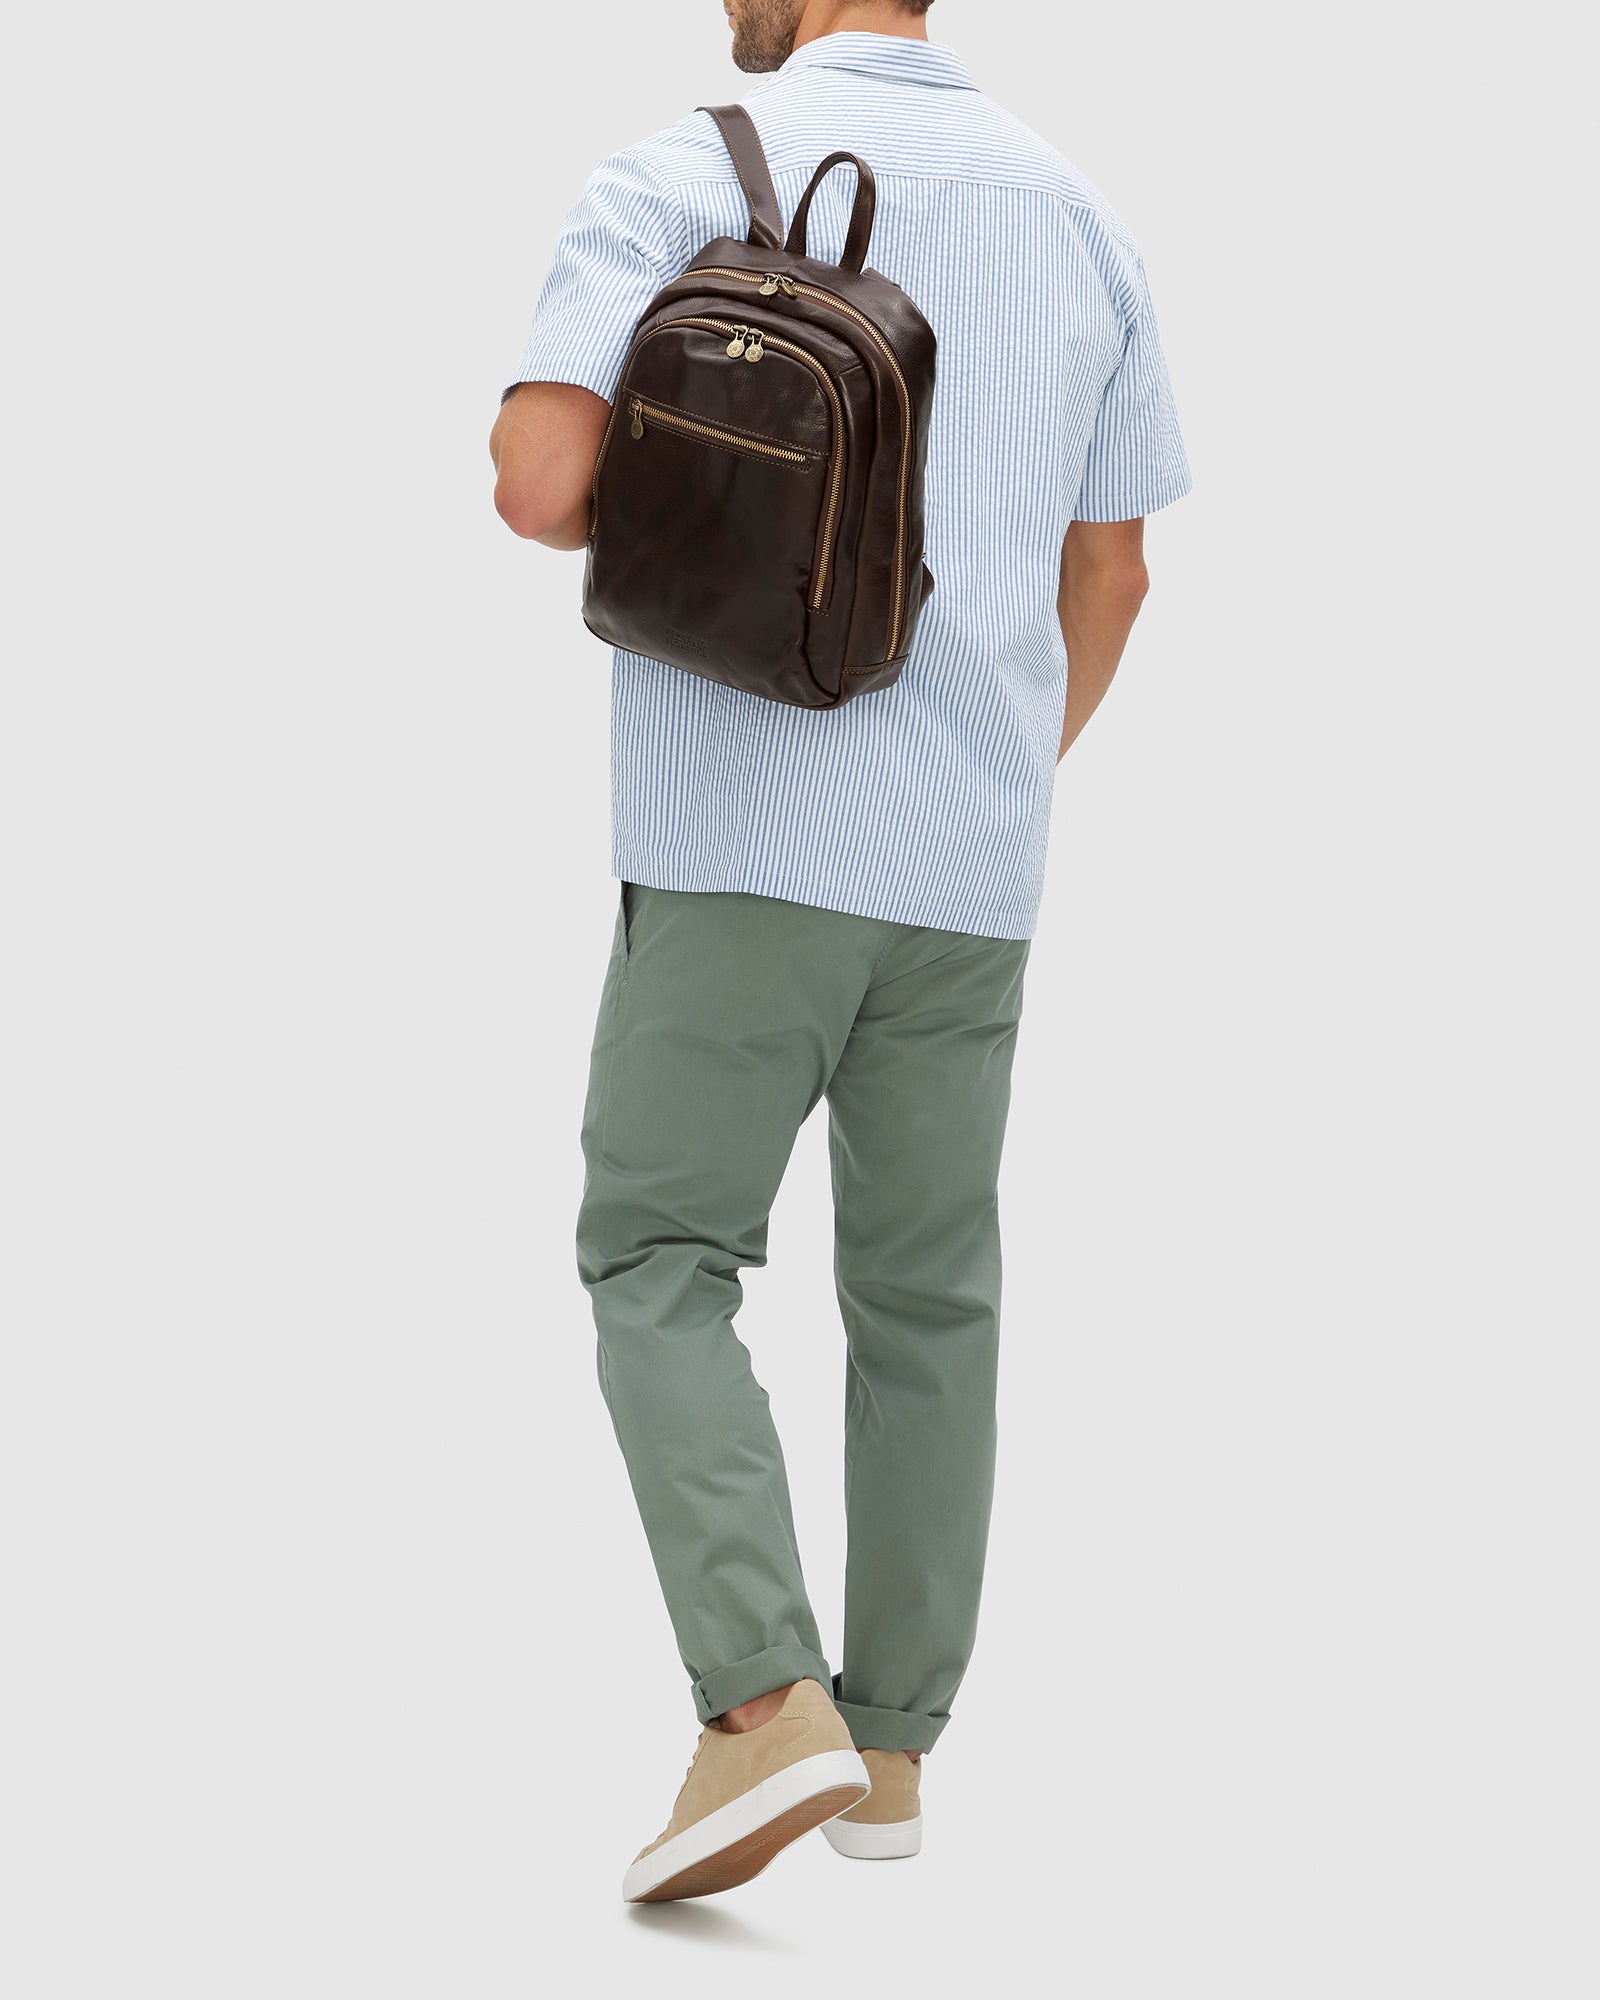 Archy Brown - Leather Backpack 13" laptop